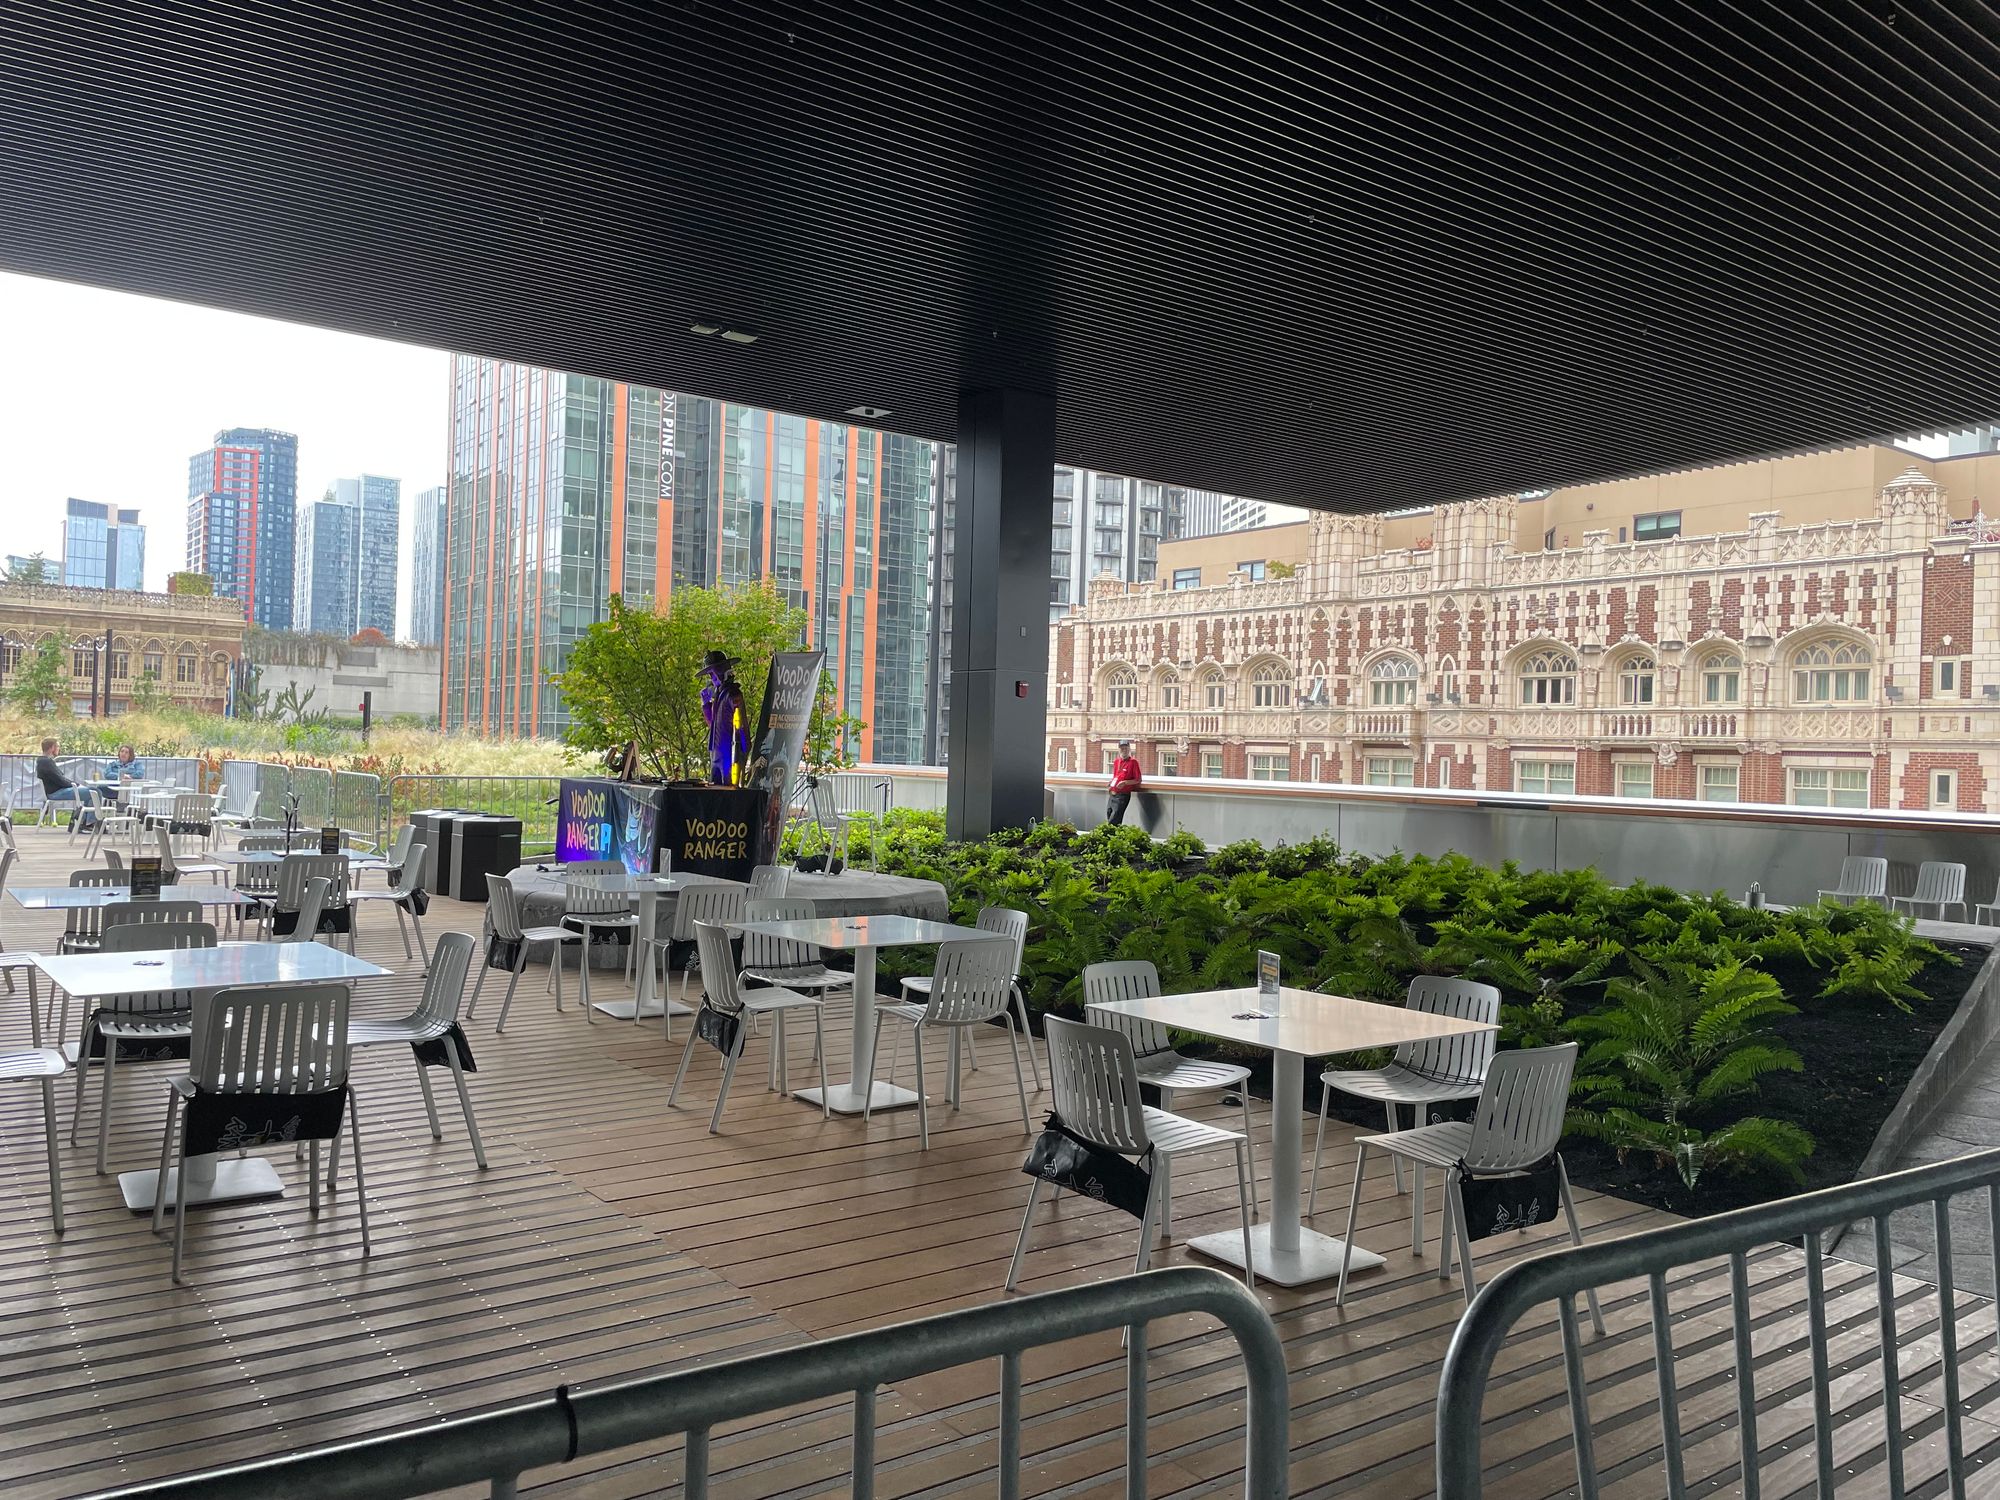 A covered patio atop a building in a city, with seats, a booth, and plants.